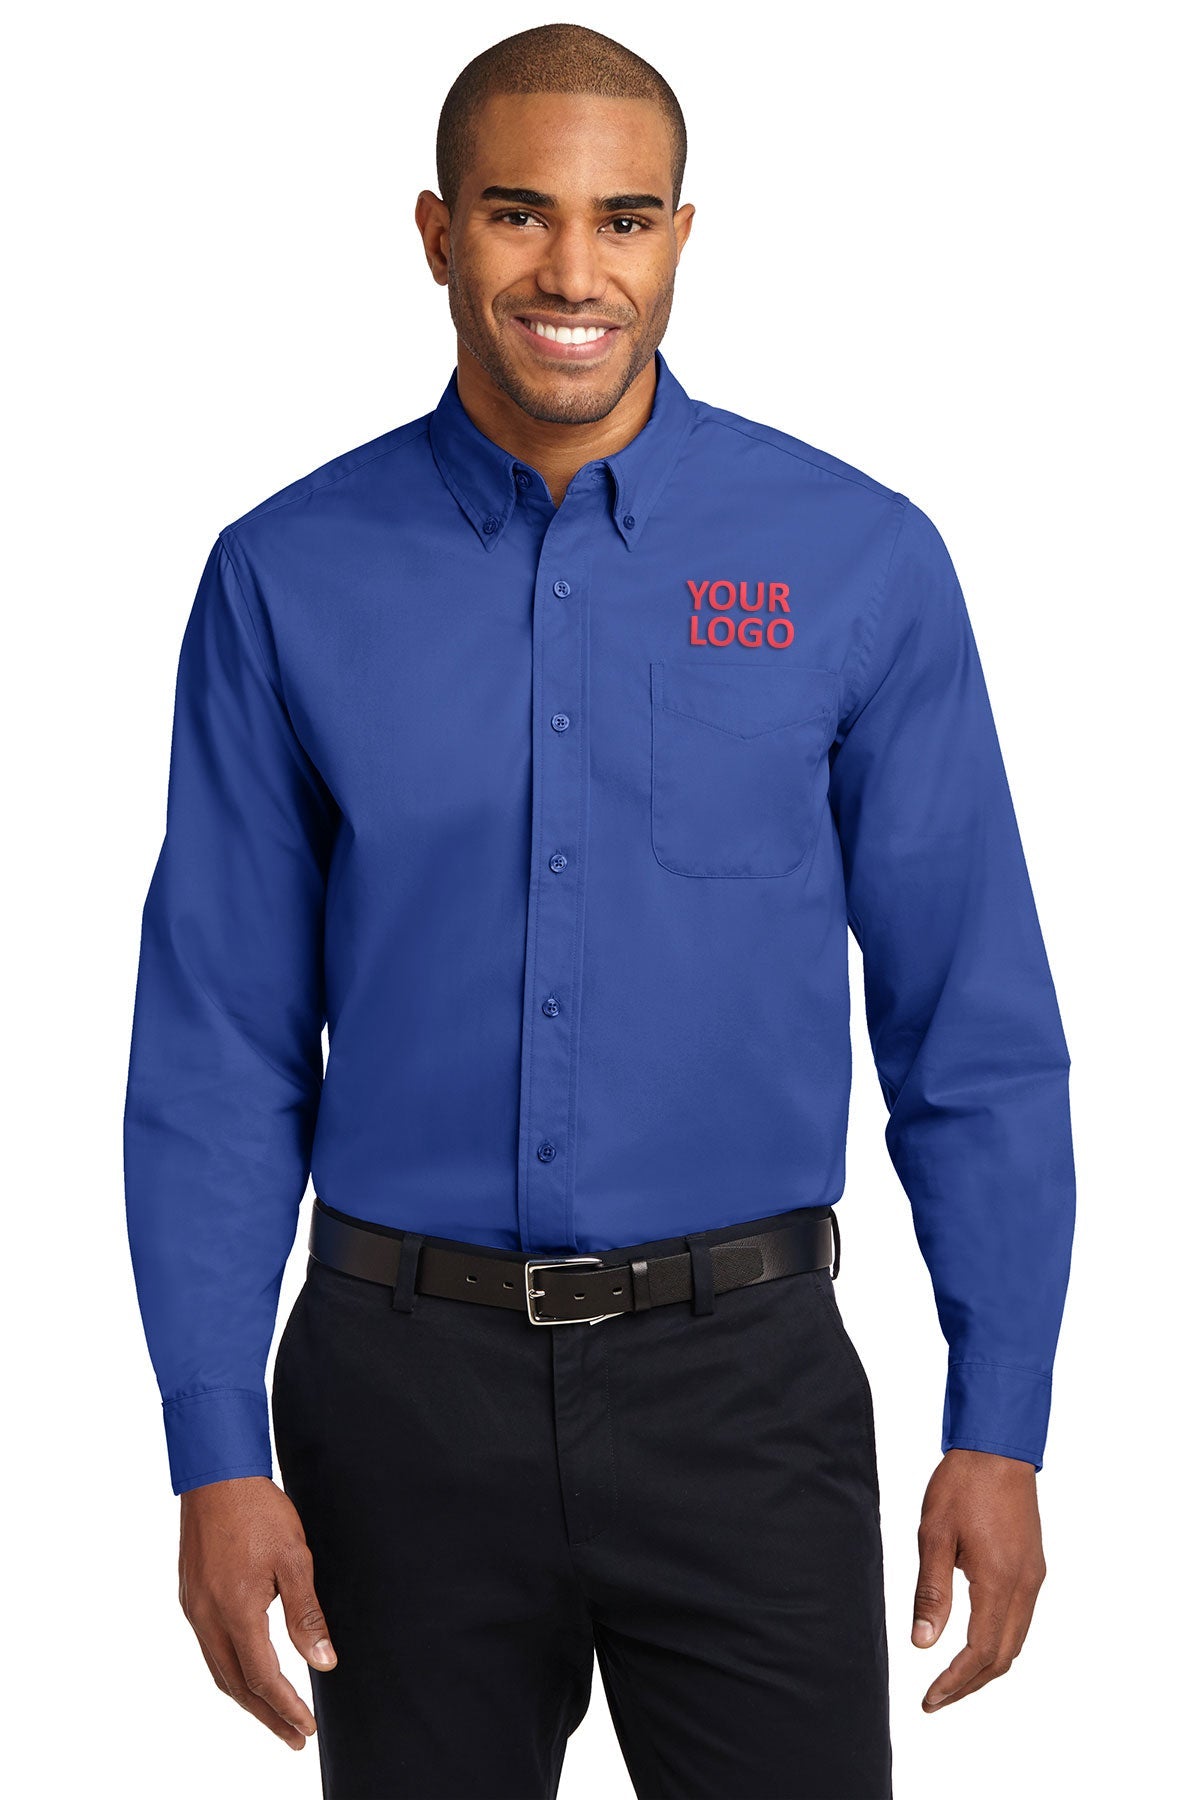 Port Authority Royal/ Classic Navy TLS608 embroidered work shirts